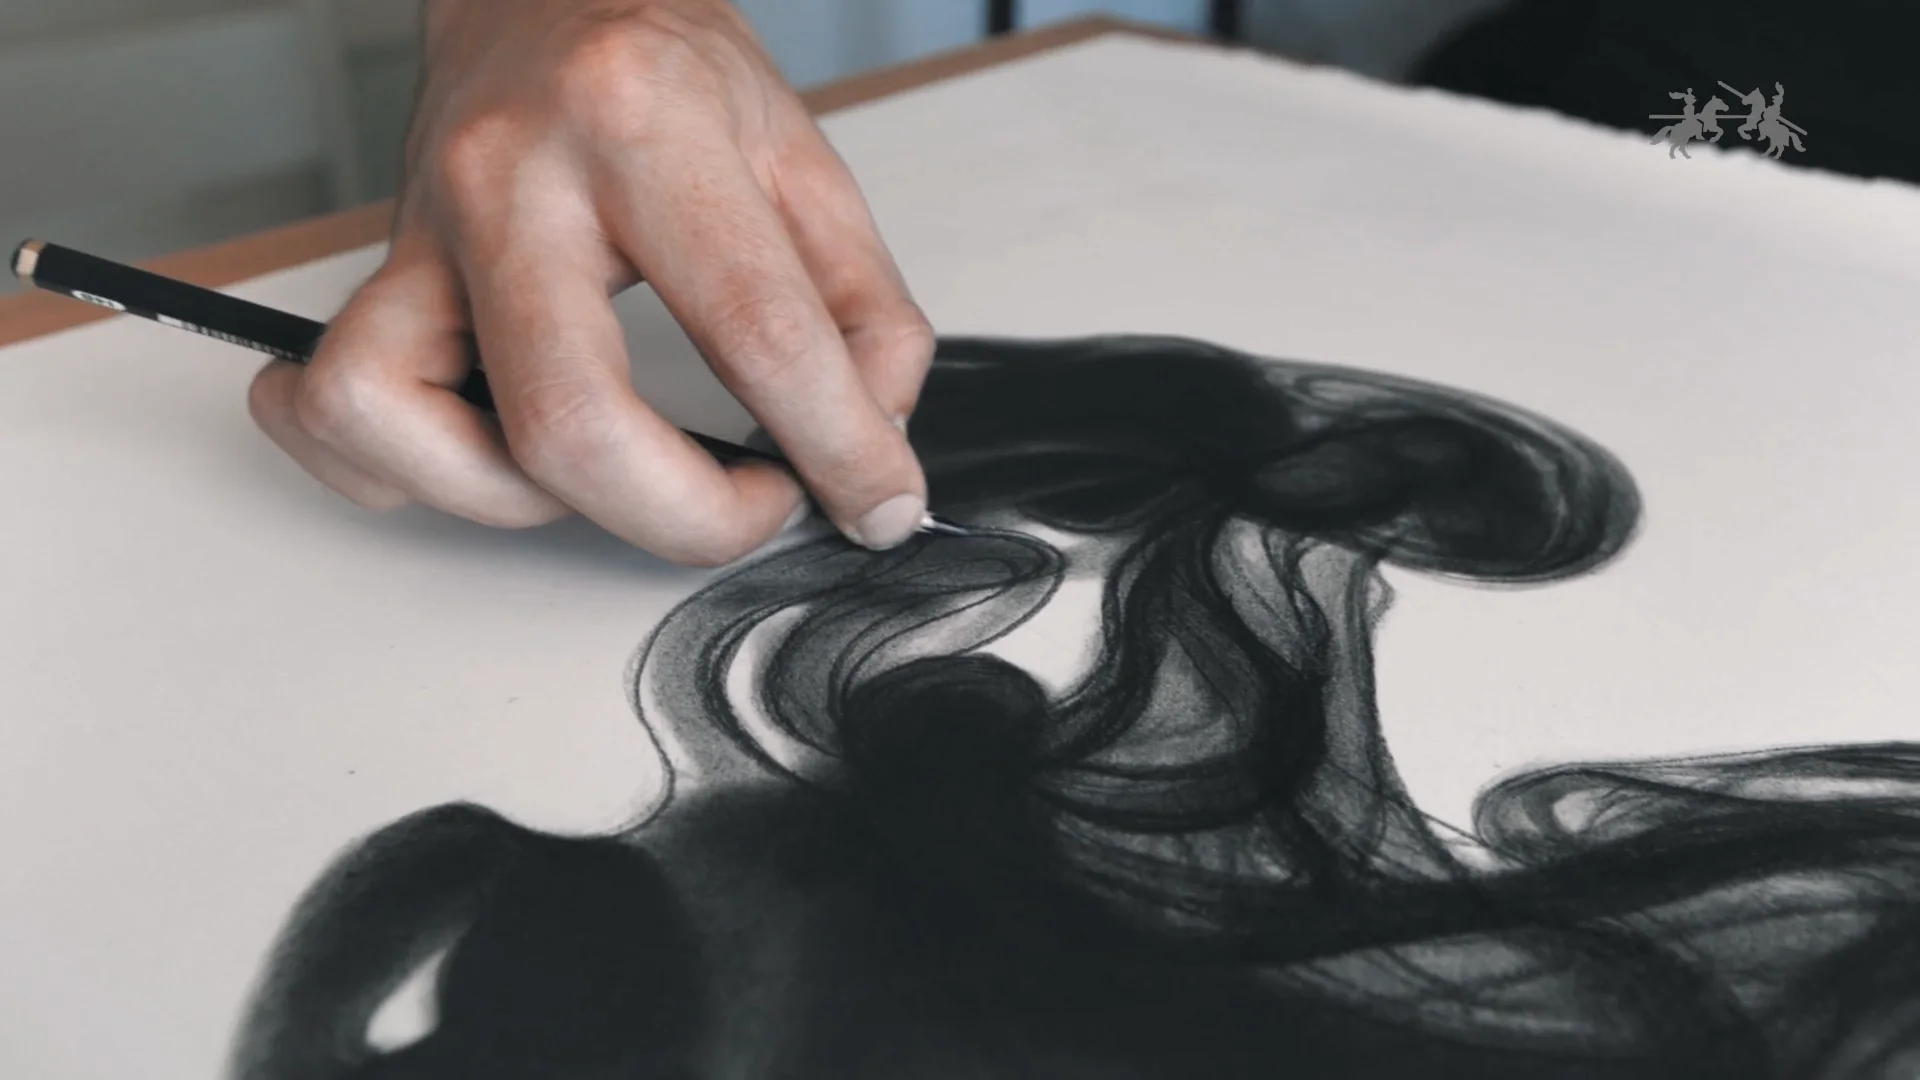 Faber-Castell - Abstract drawing with Pitt pastel pencils and Polychromos  artists' pastels on Vimeo